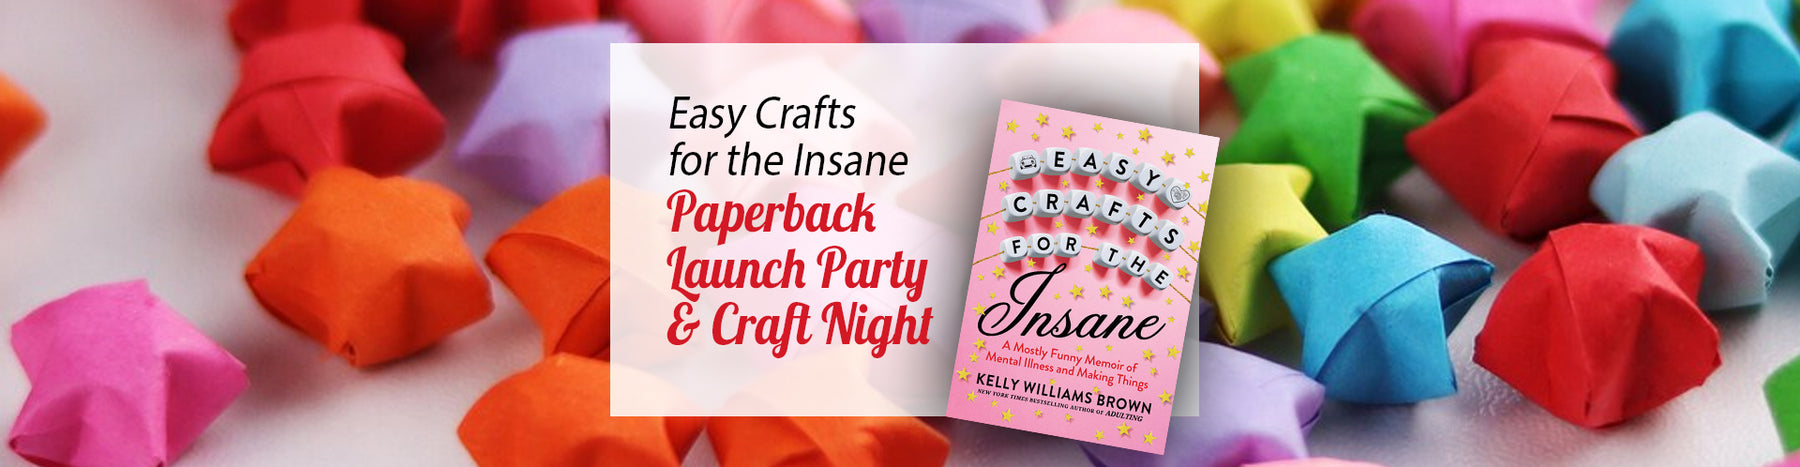 Easy Crafts for the Insane Paperback Launch Party + Craft Night